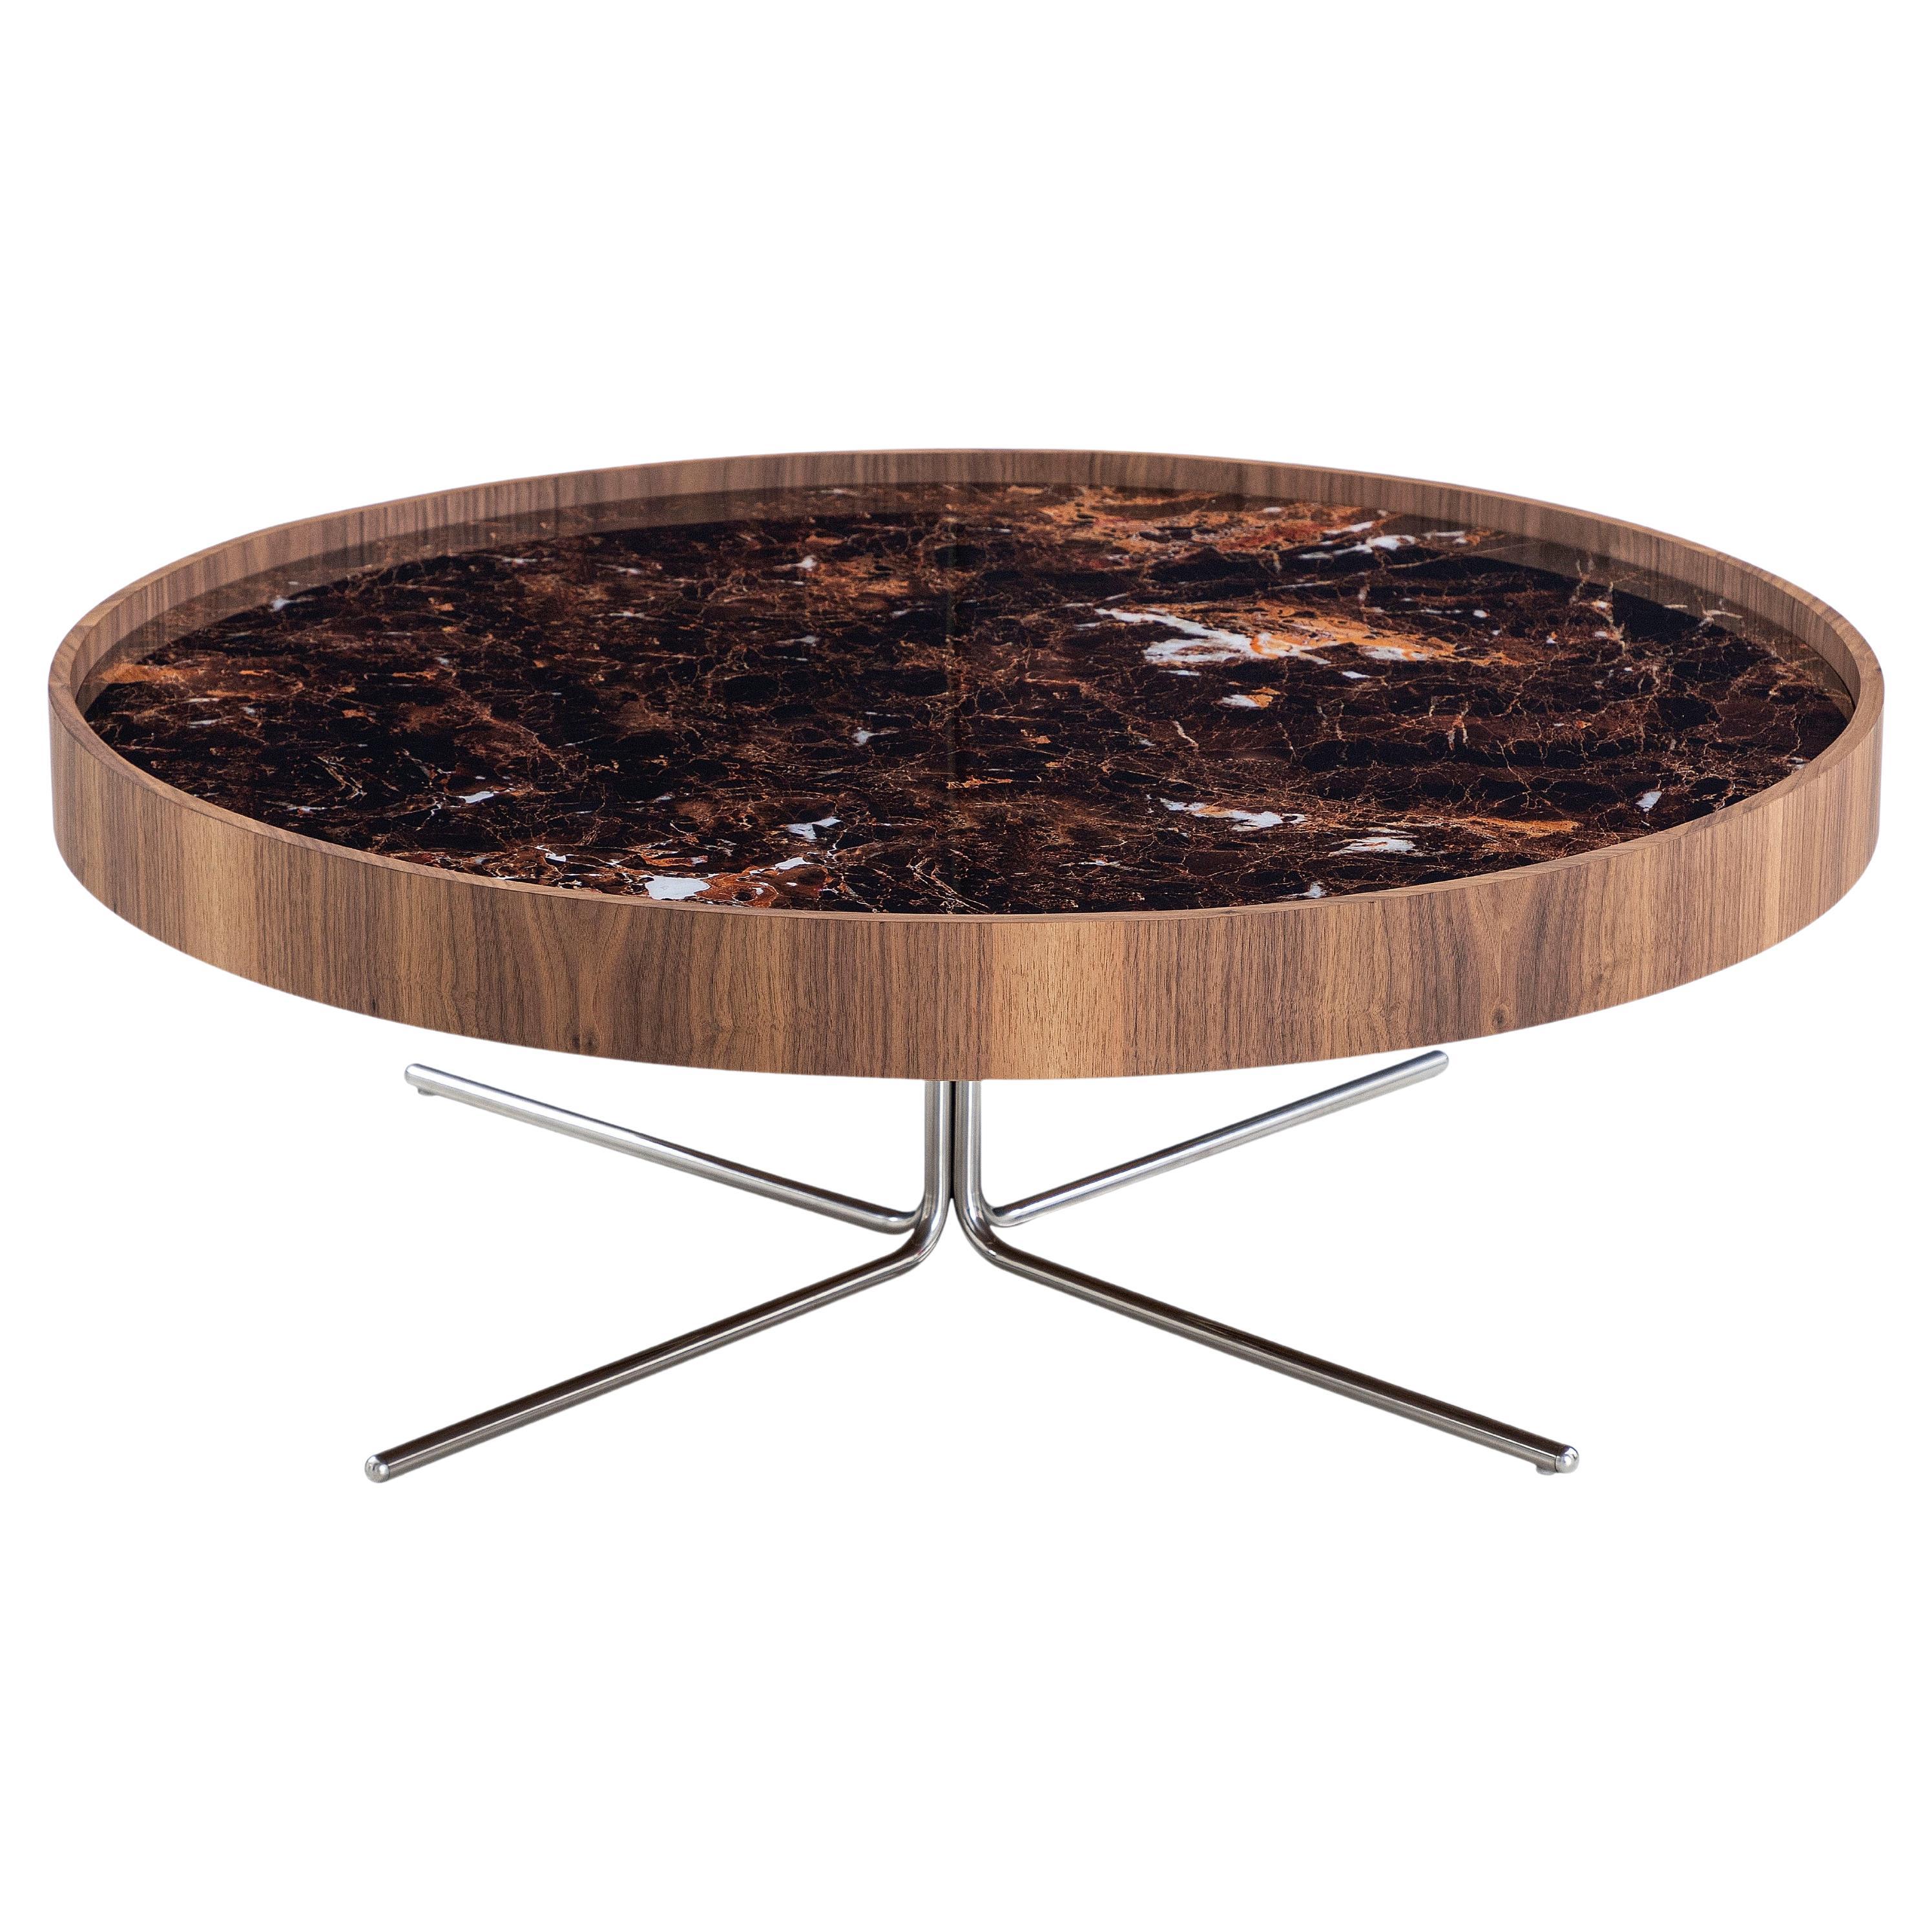 Regia Occasional Table in Walnut Wood Finish Featuring Imperial Brown Glass 39'' For Sale